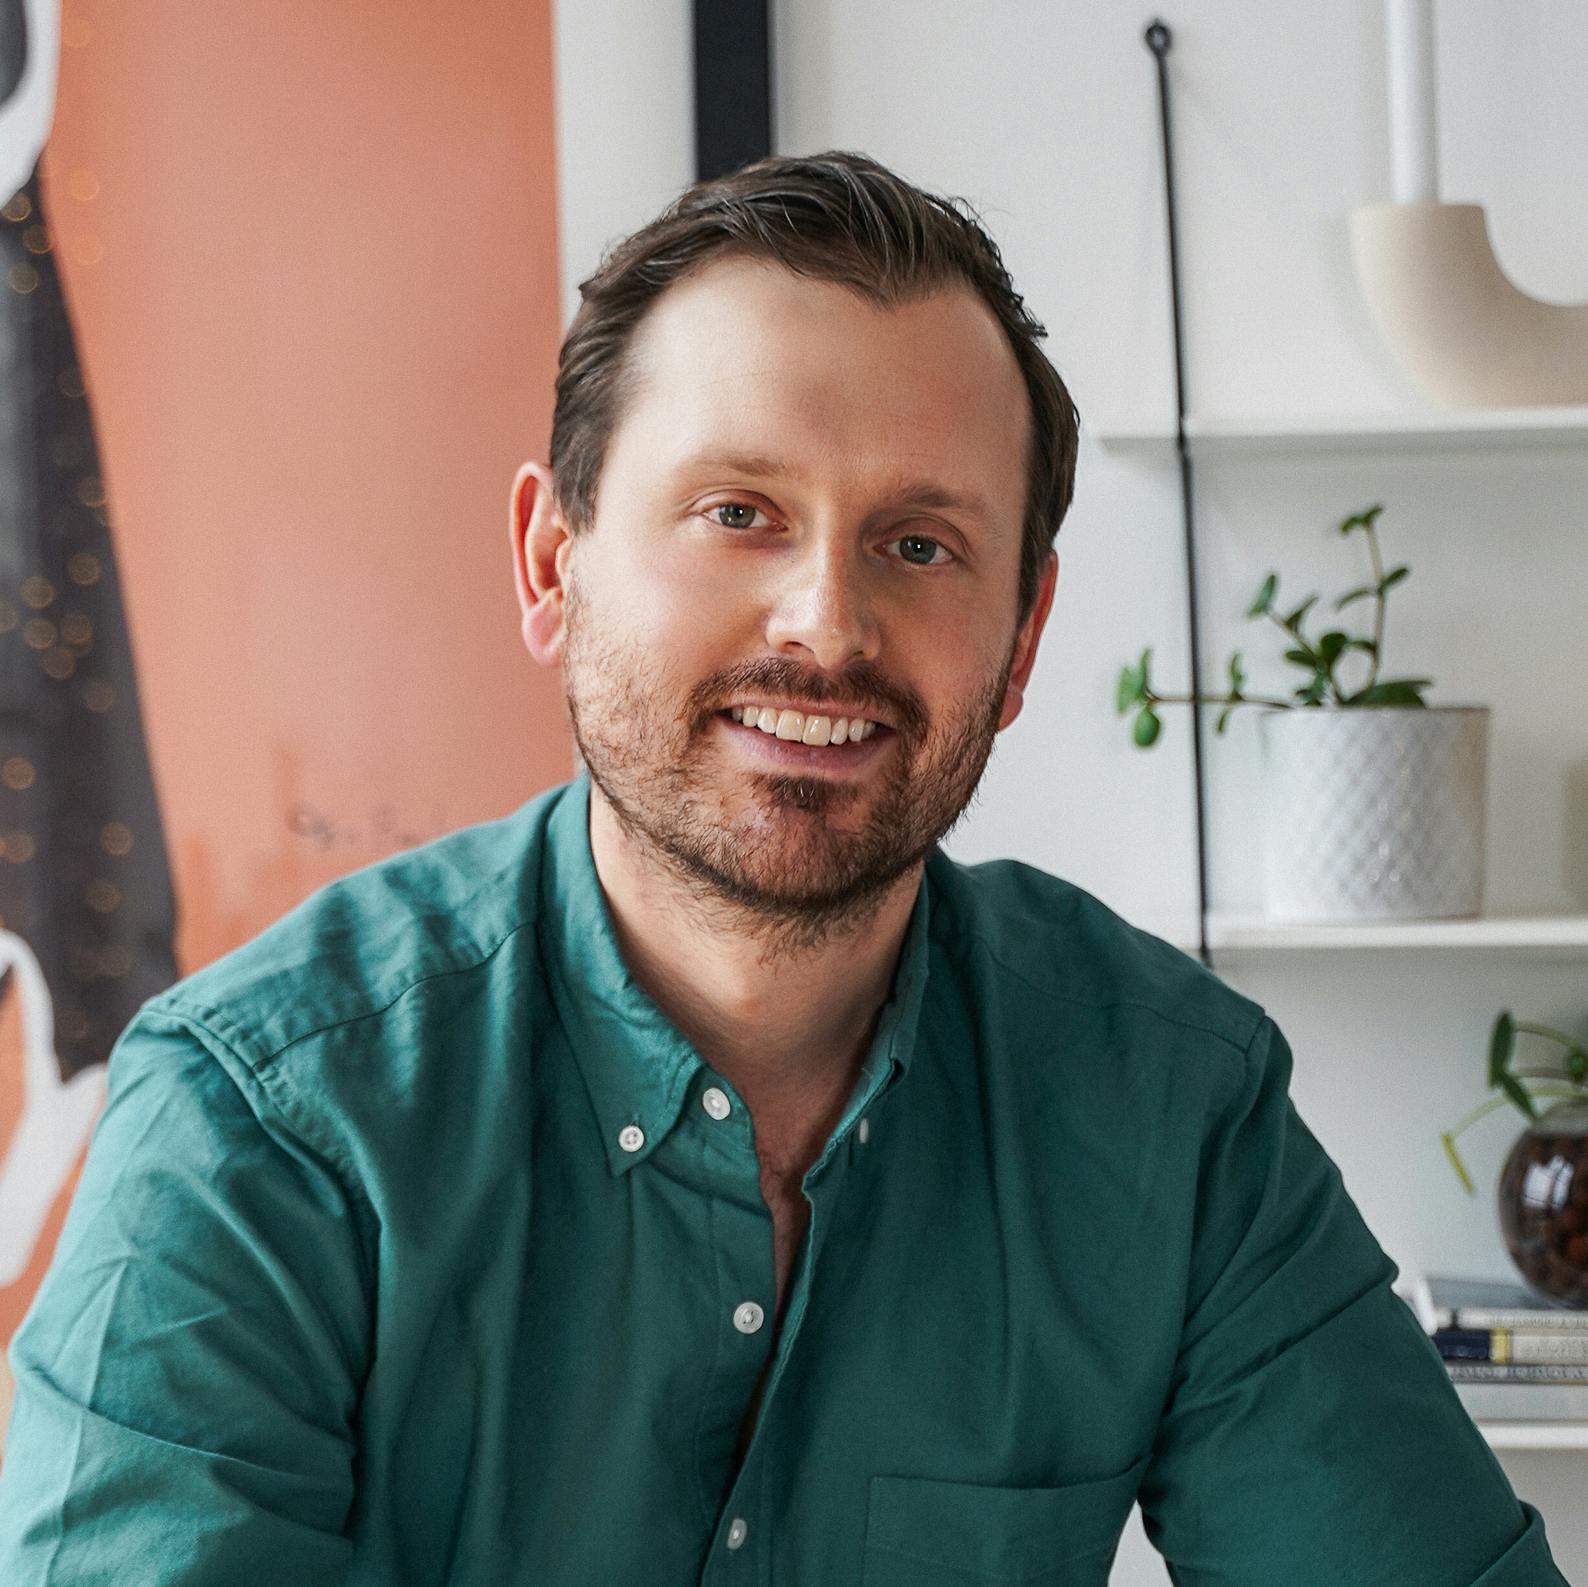 Portrait of StrawberryFrog Managing Director Dan Langlitz wearing a green button-down and smiling in front of a minimalistic background.